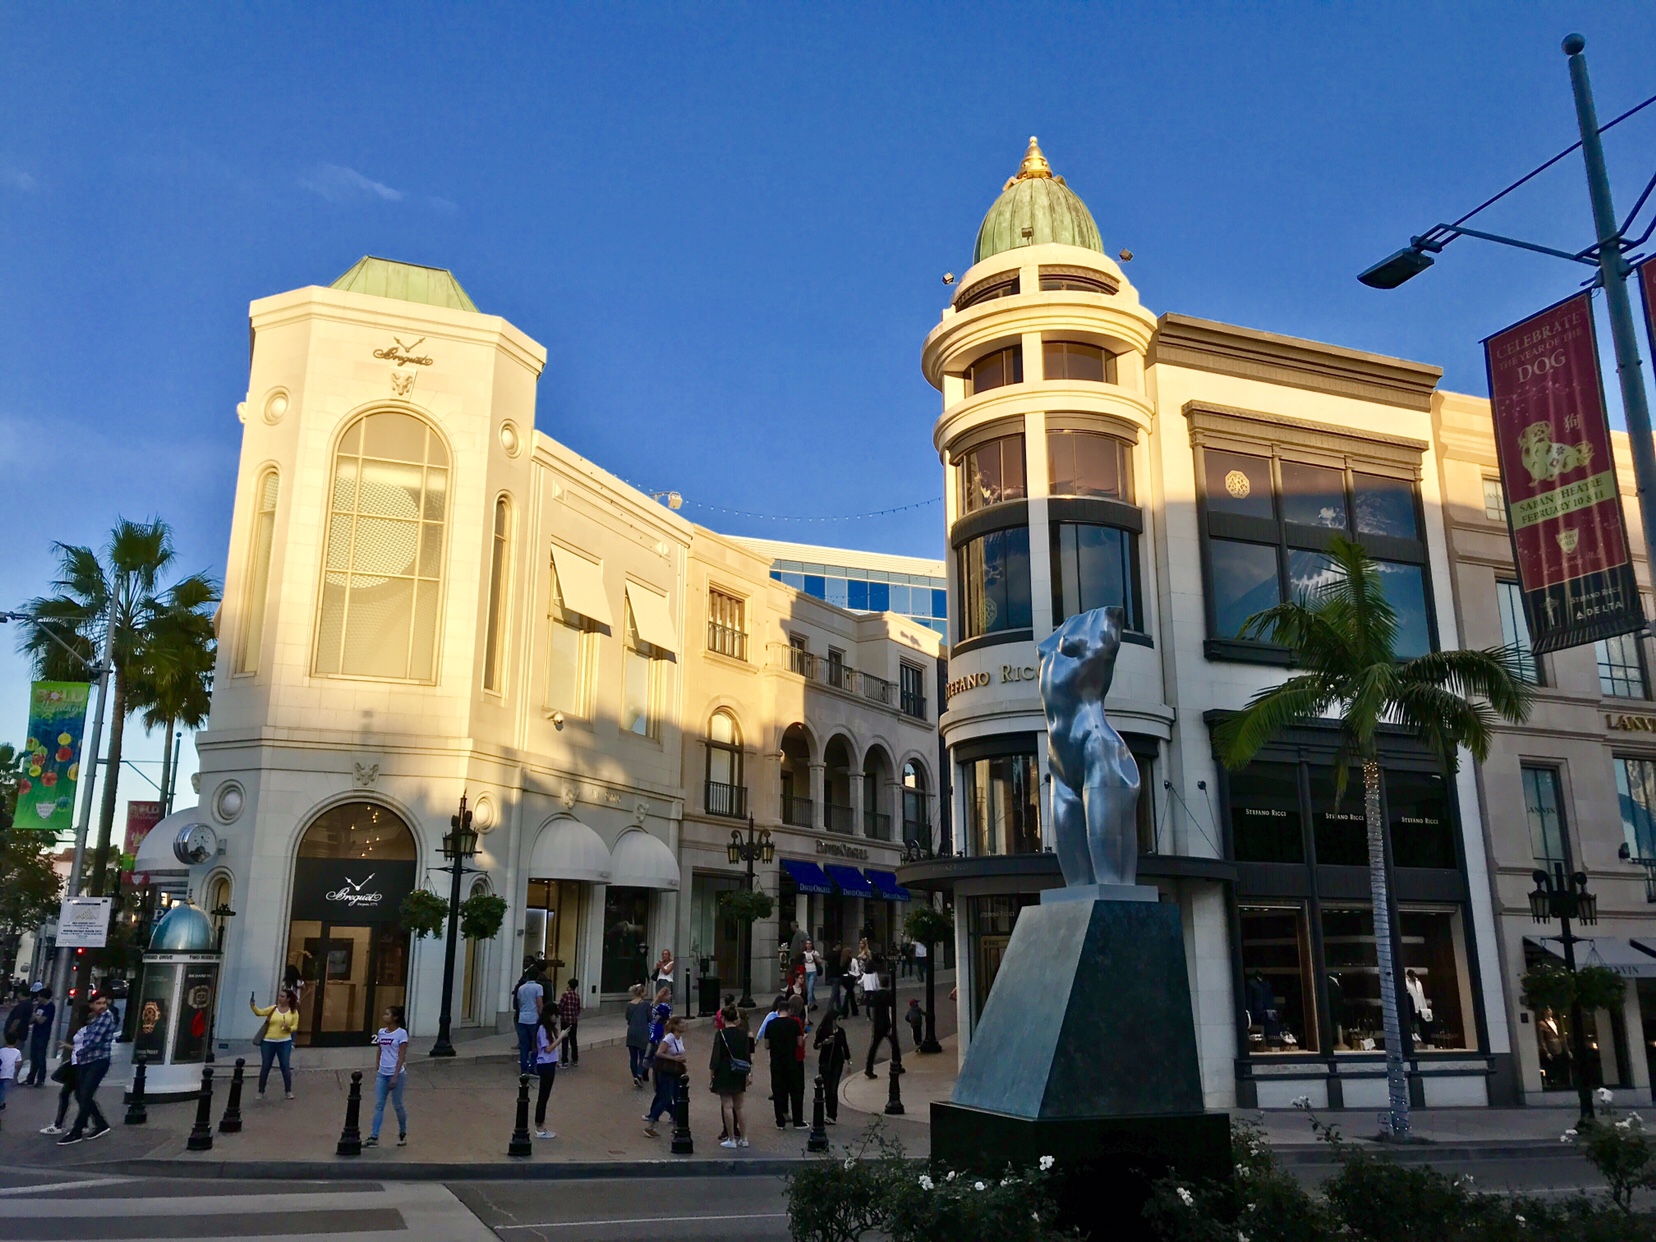 It’s a busy afternoon on Rodeo Drive in Beverly Hills.